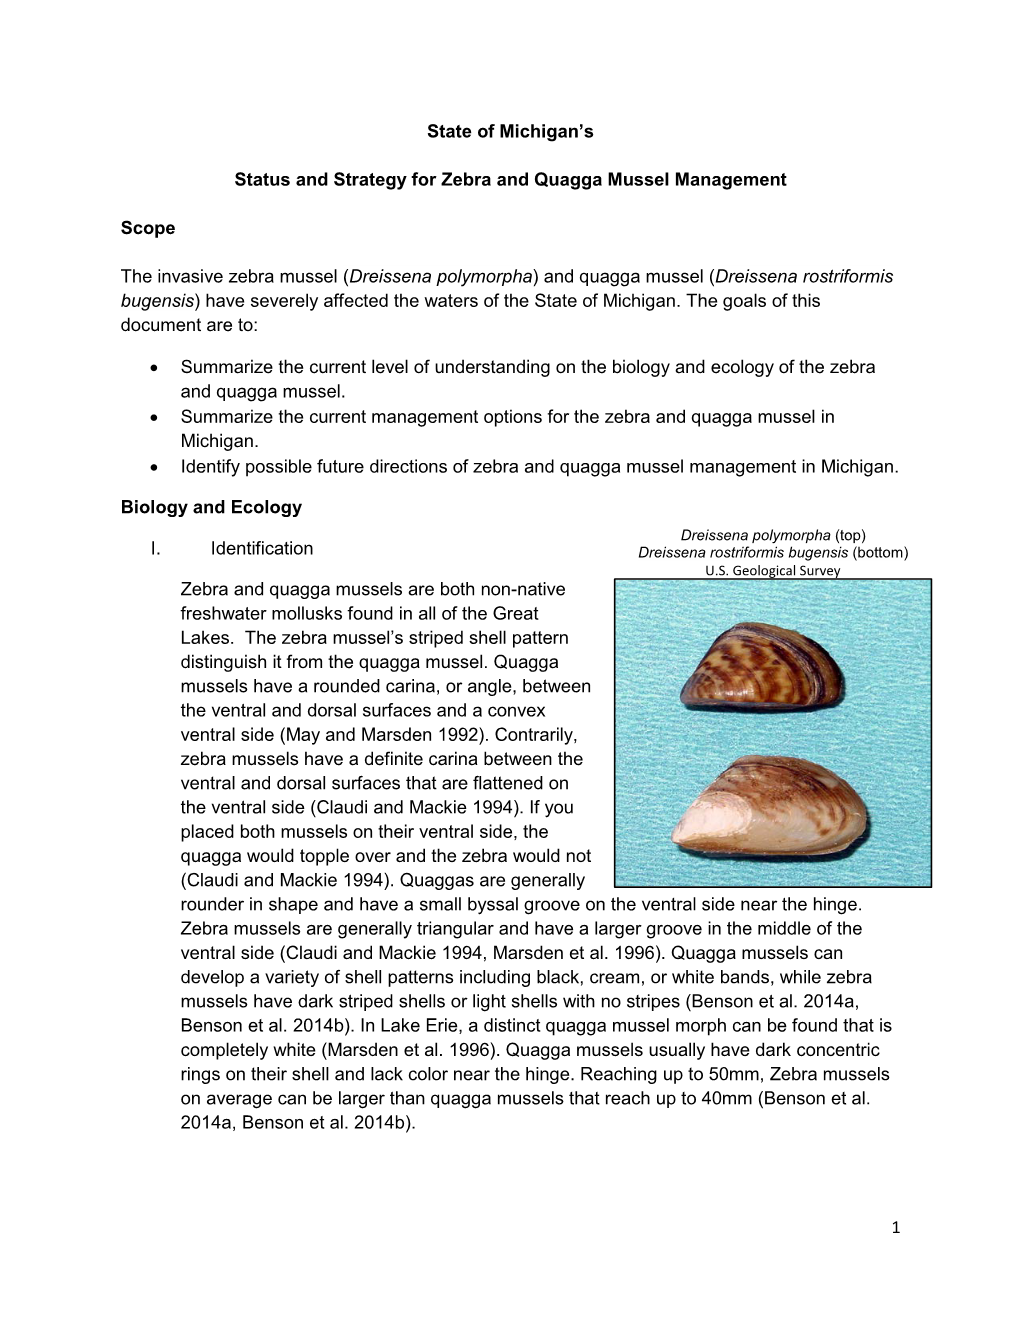 Status and Strategy for Zebra and Quagga Mussel Management